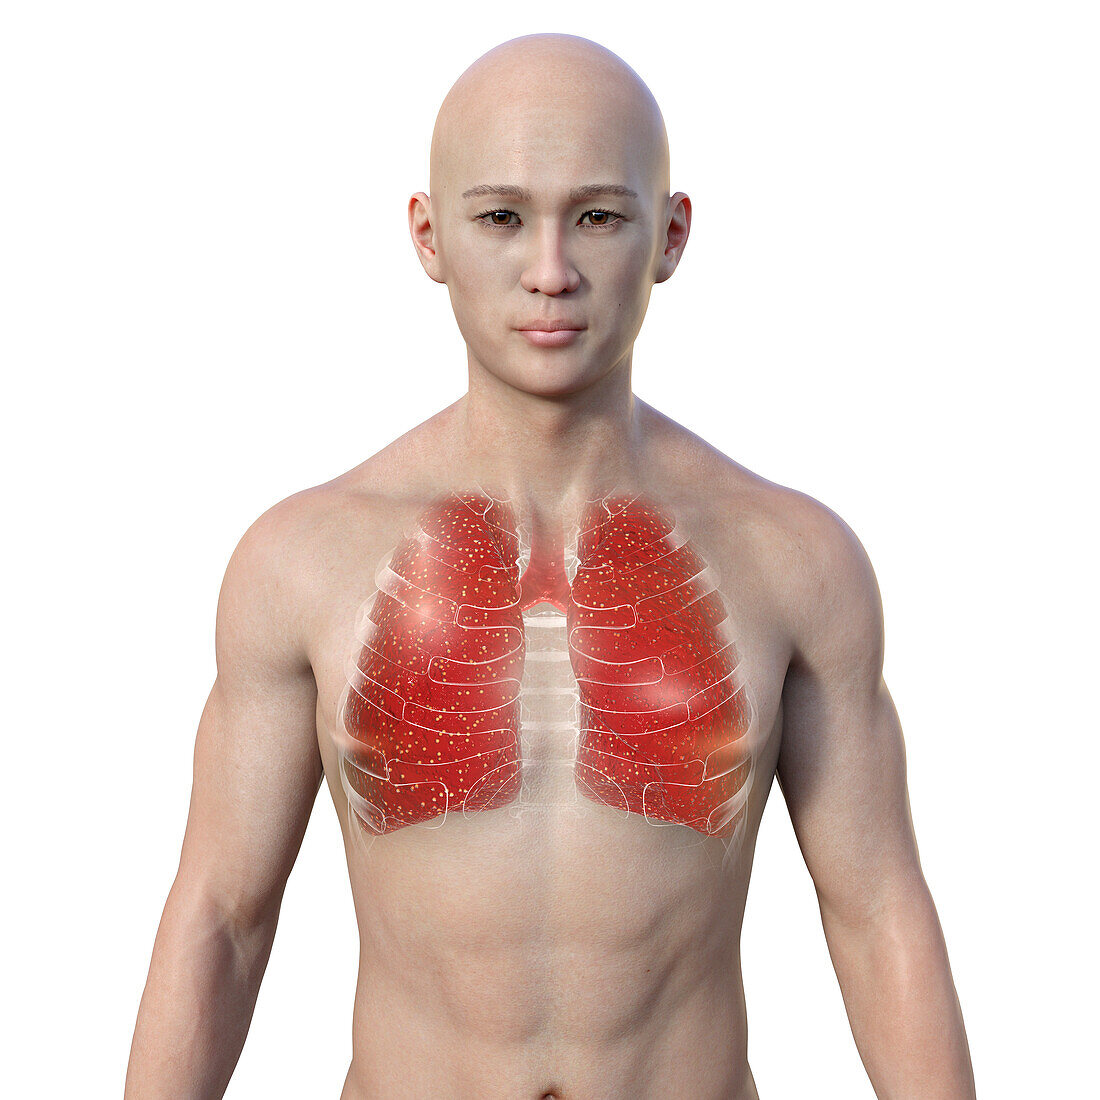 Man with miliary tuberculosis, illustration